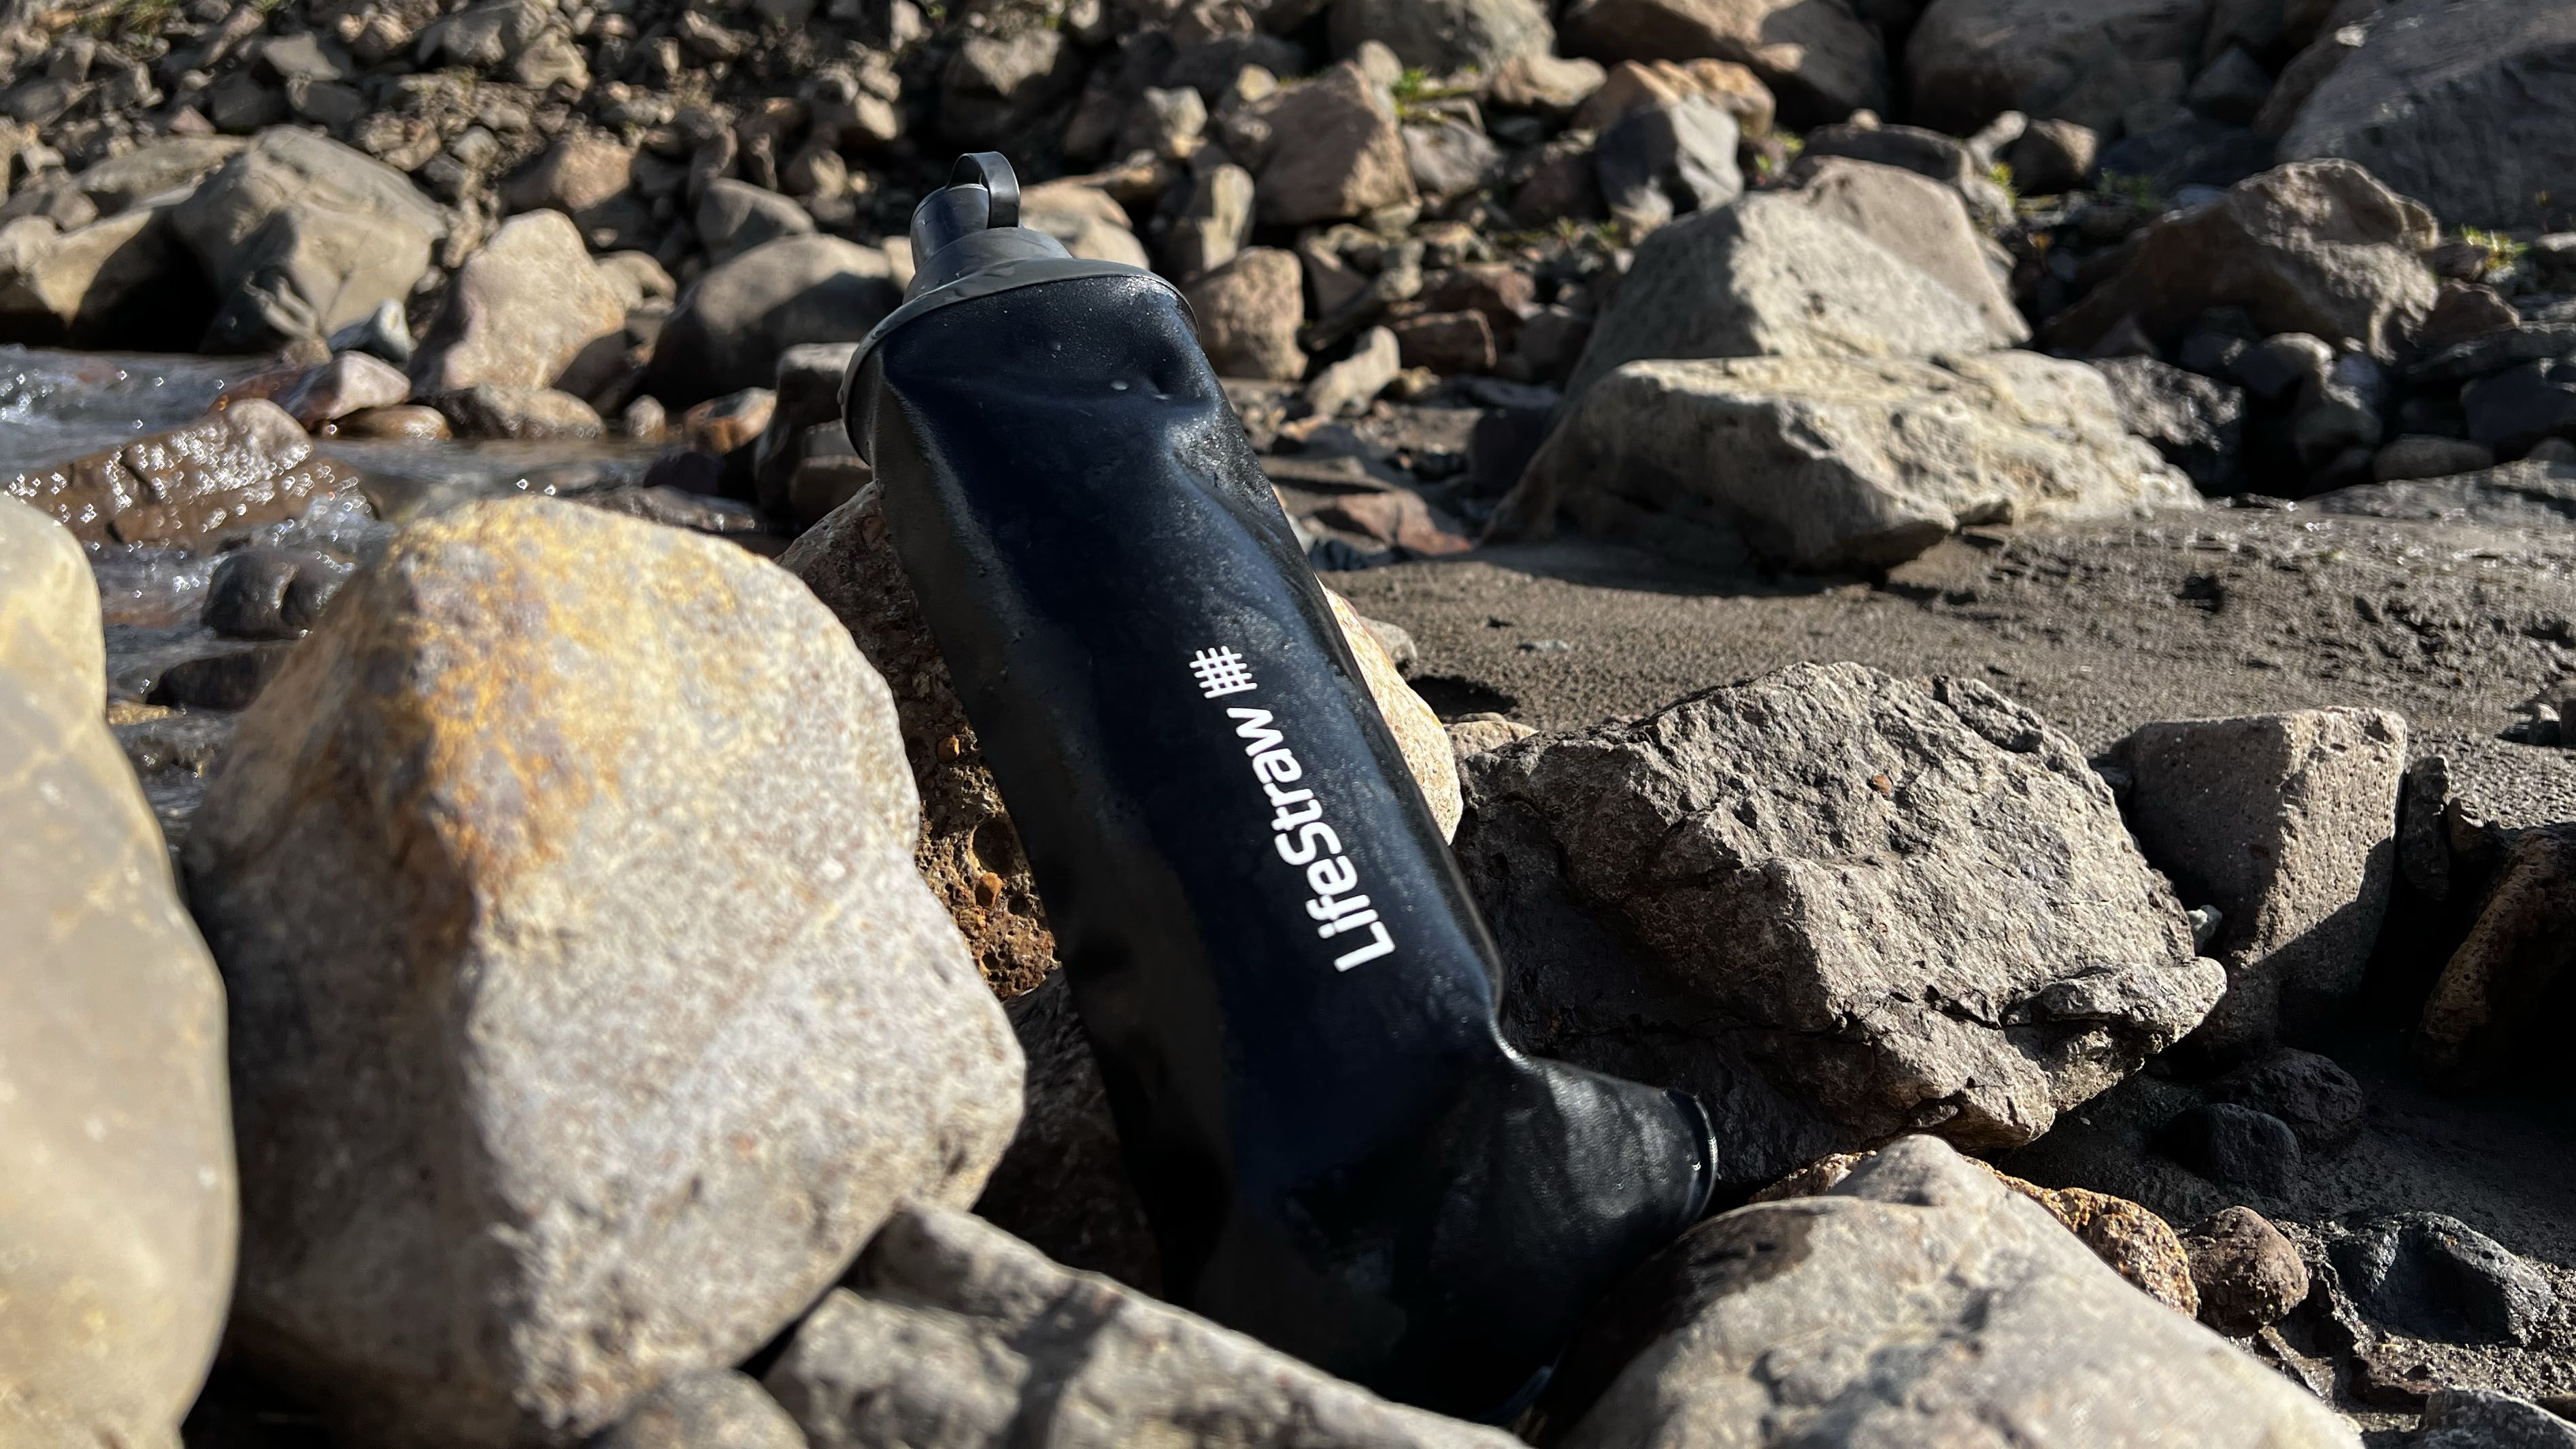 Finding the Best Water Filter Bottle For Travel & Hiking (2023)